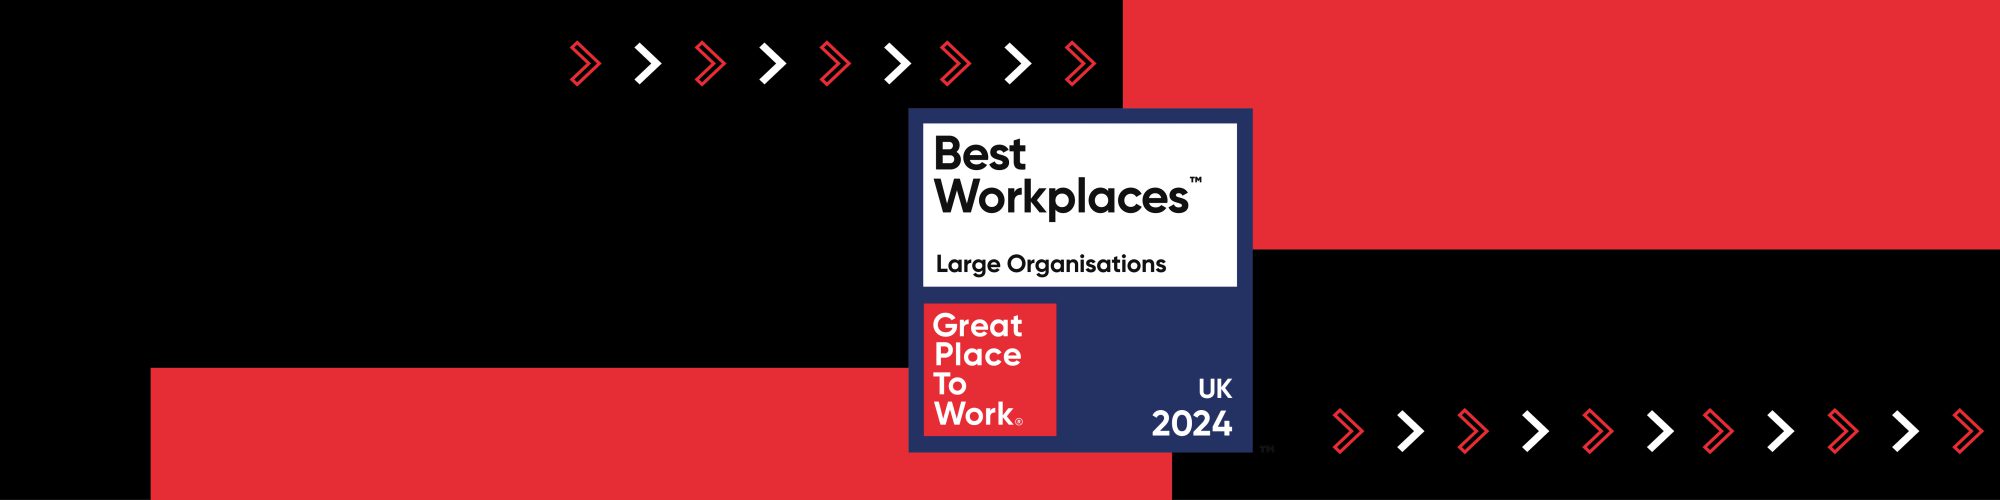 We’ve been named as a UK Best Workplace™ 2024